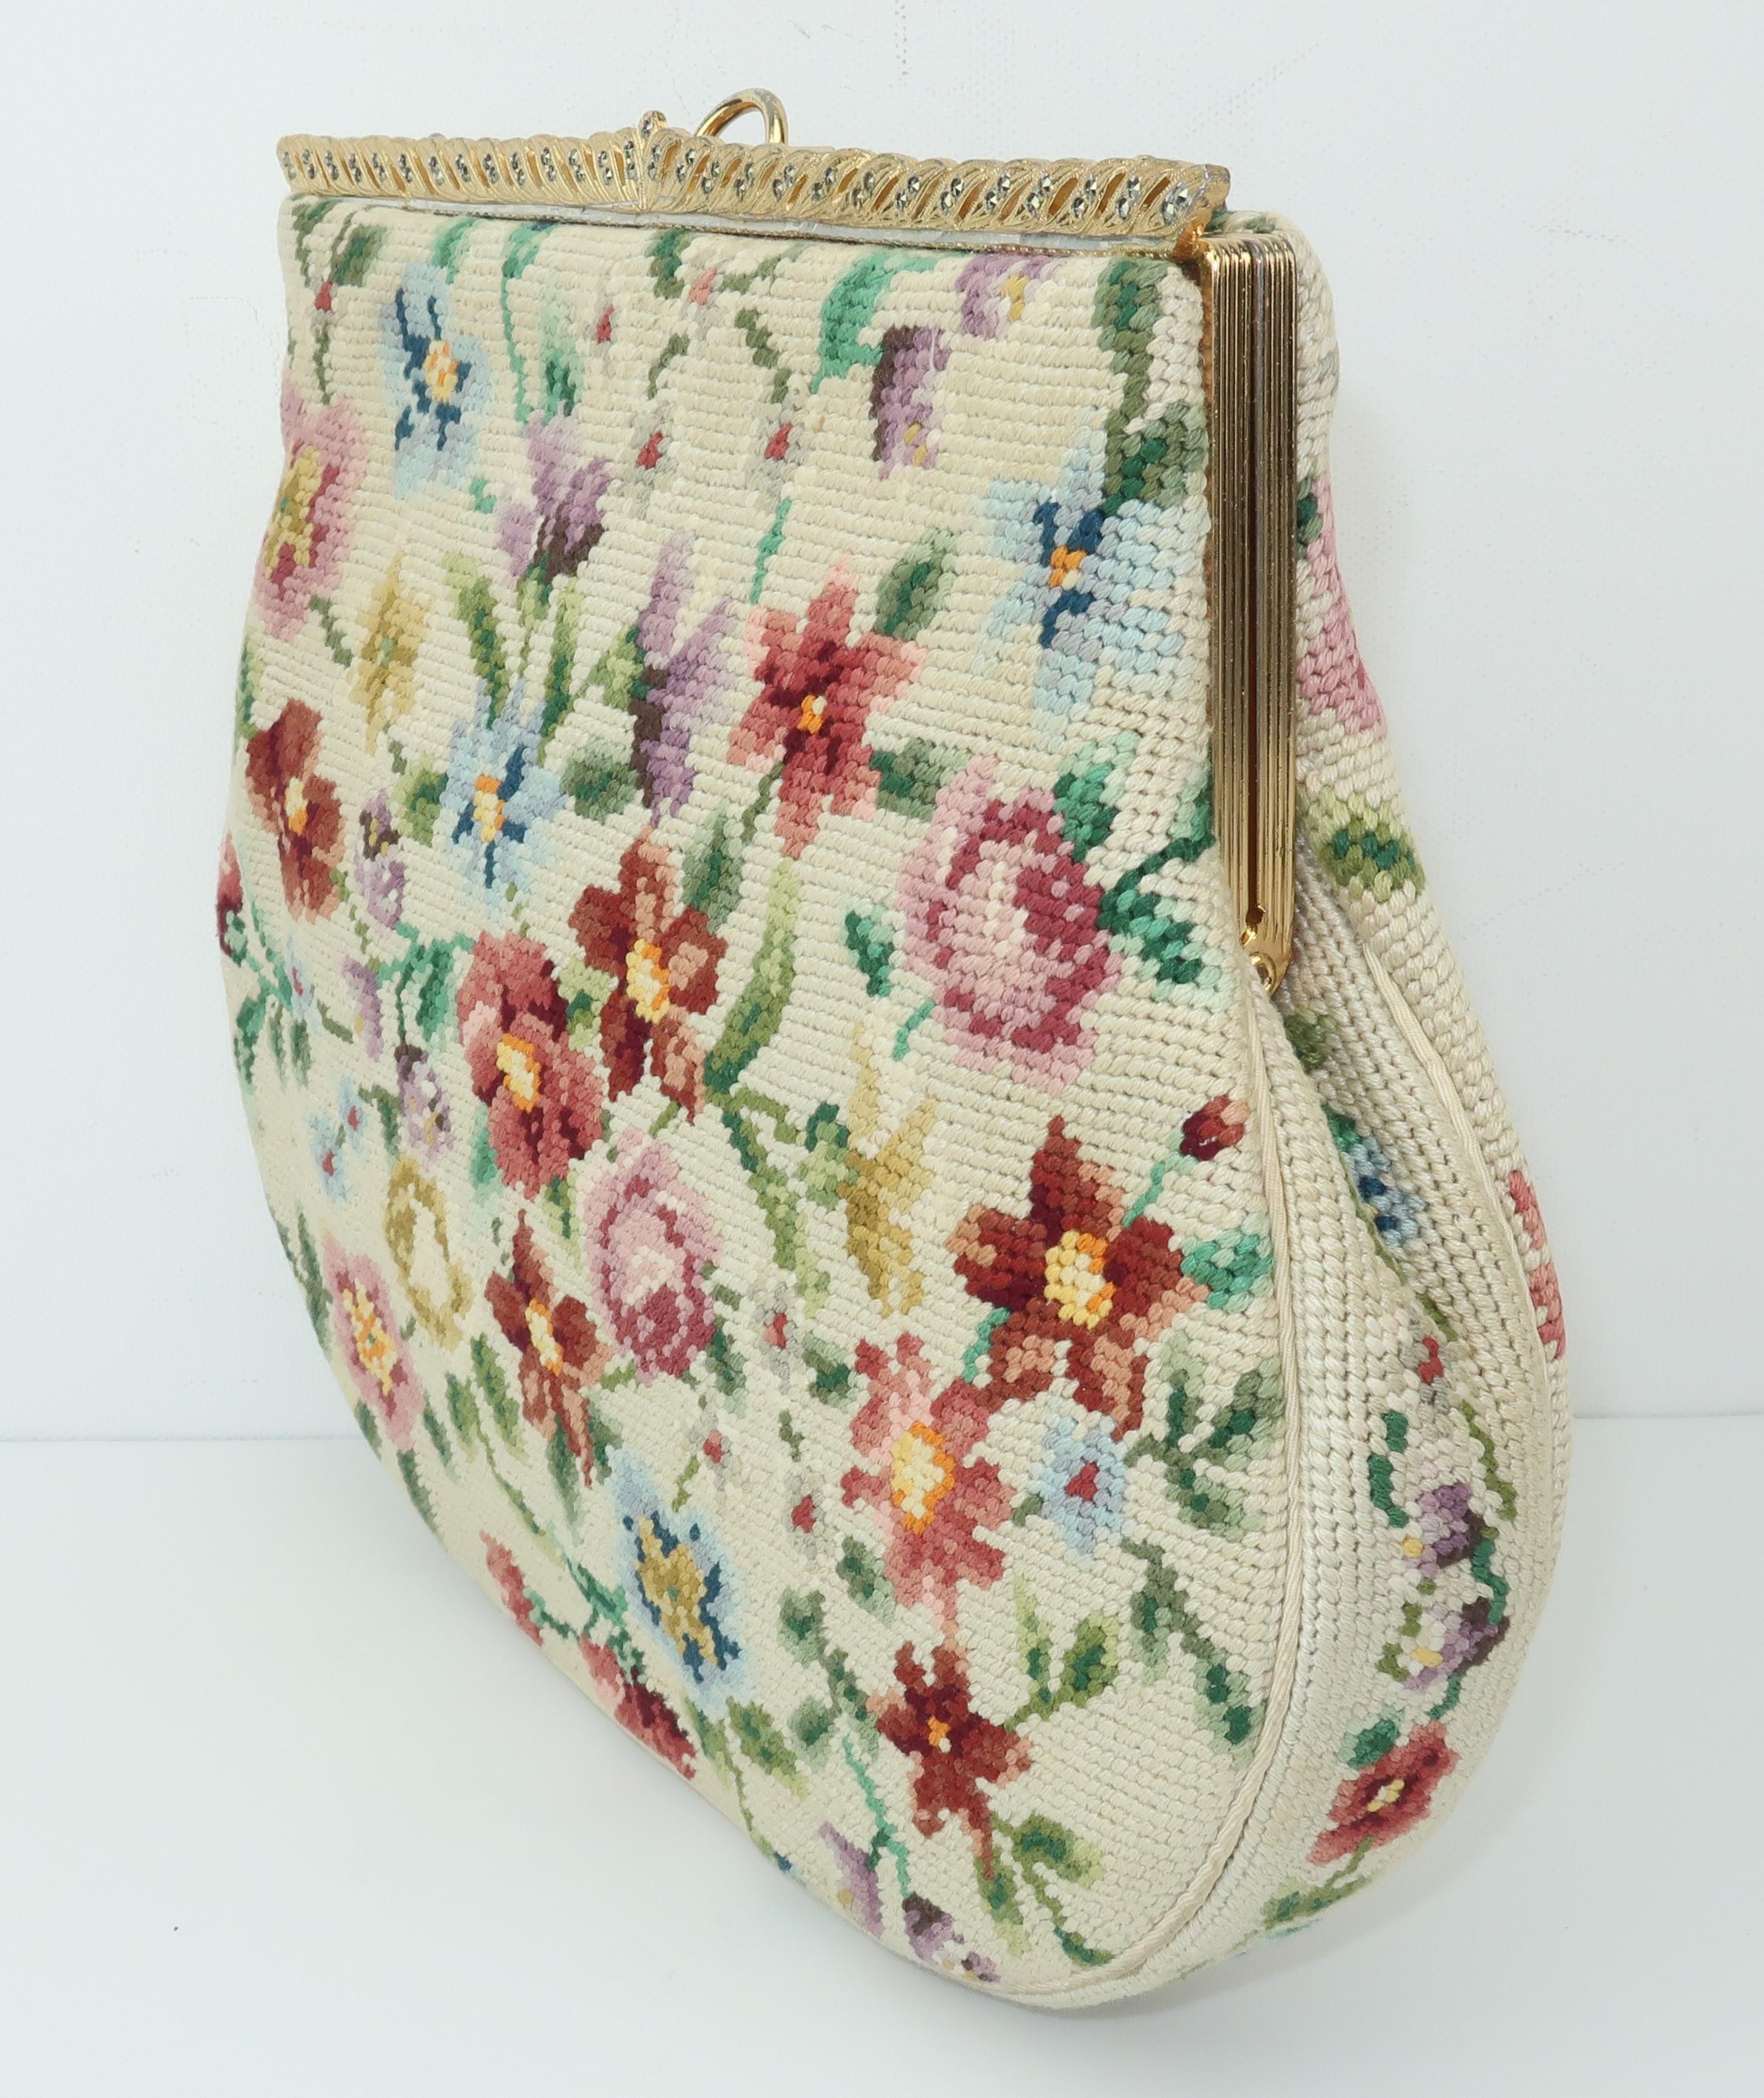 Women's Switkes Floral Needlepoint Handbag With Decorated Frame, C.1950